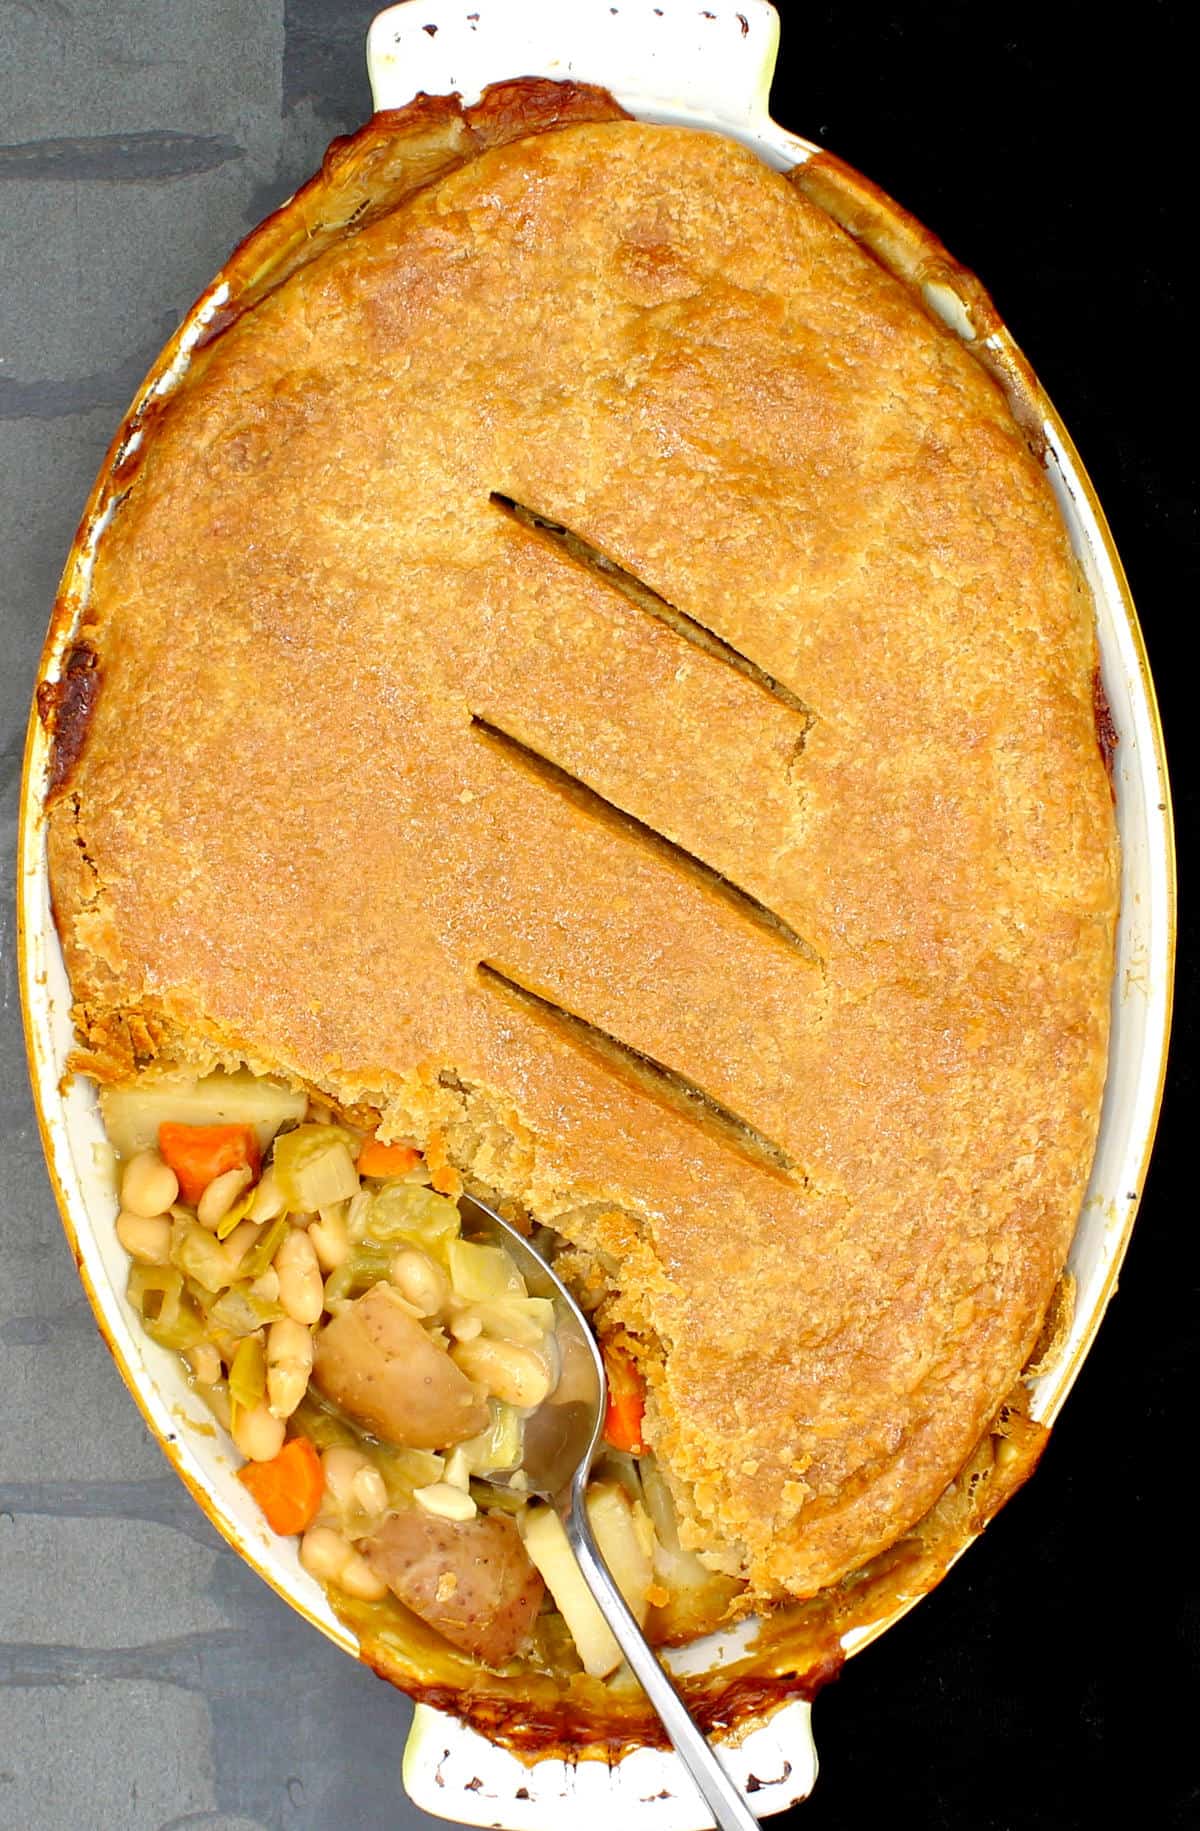 Overhead shot of a vegan pot pie with a golden whole wheat crust and a filling of beans and potatoes.